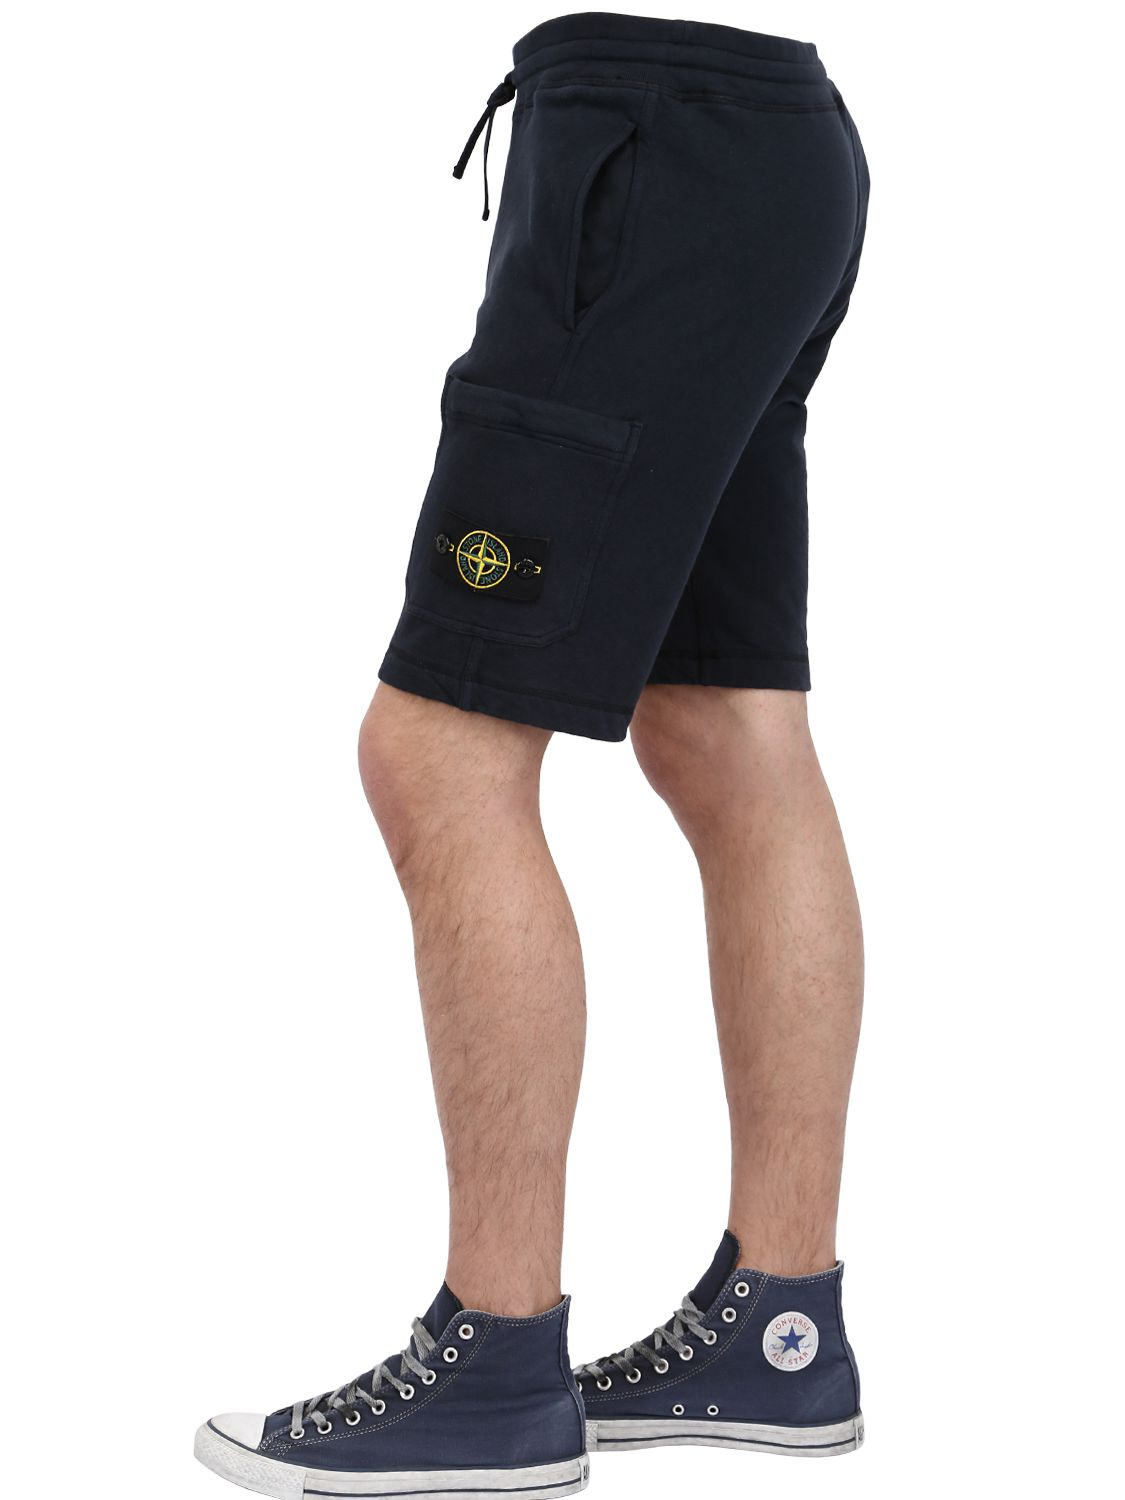 Shopping > stone island fleece shorts mens with A Reserve price, Up to 79%  OFF